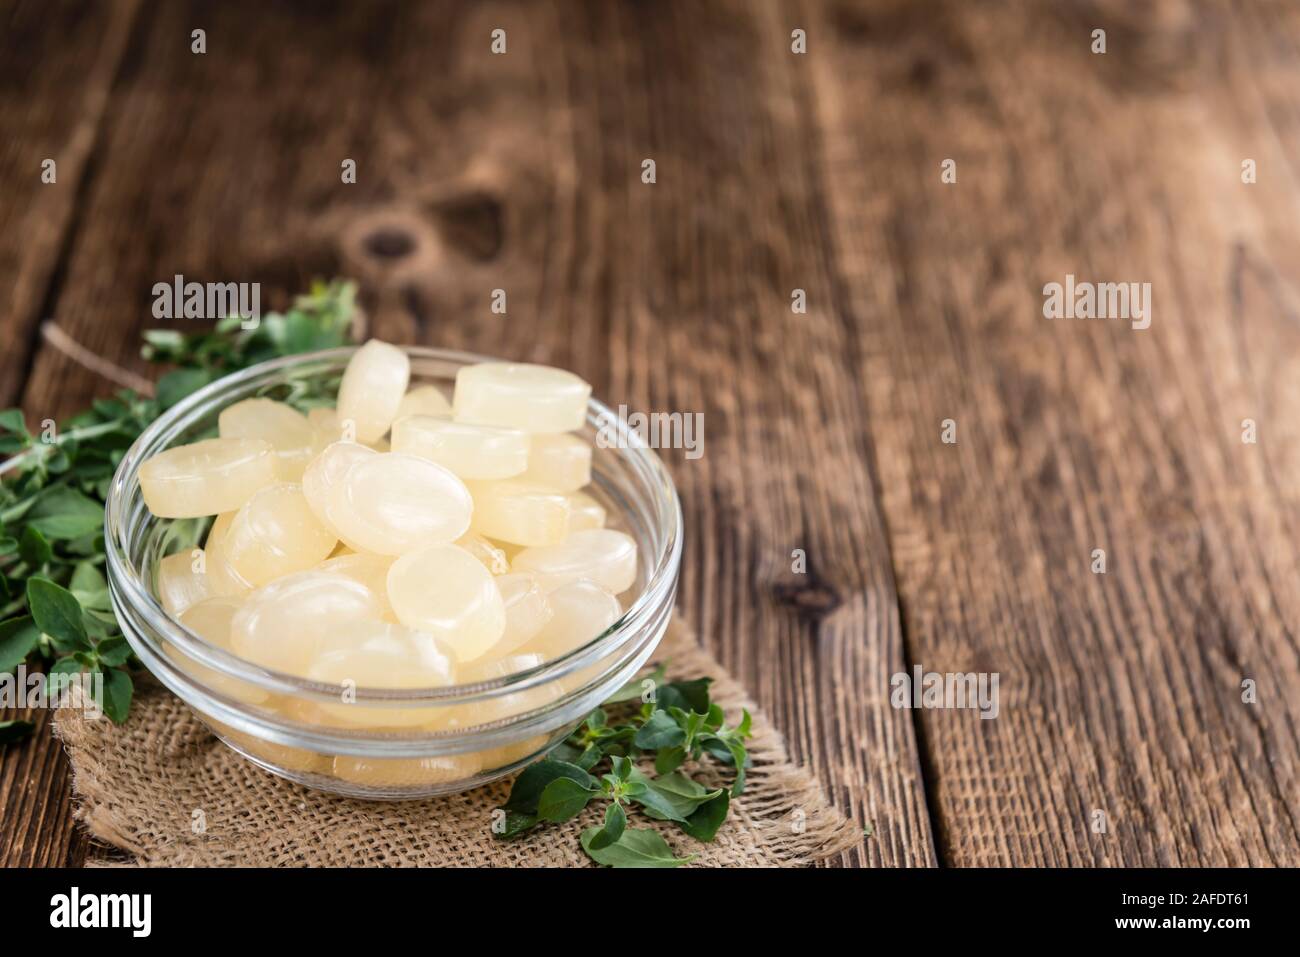 Wooden table with Menthol Candies (selective focus; close-up shot) Stock Photo